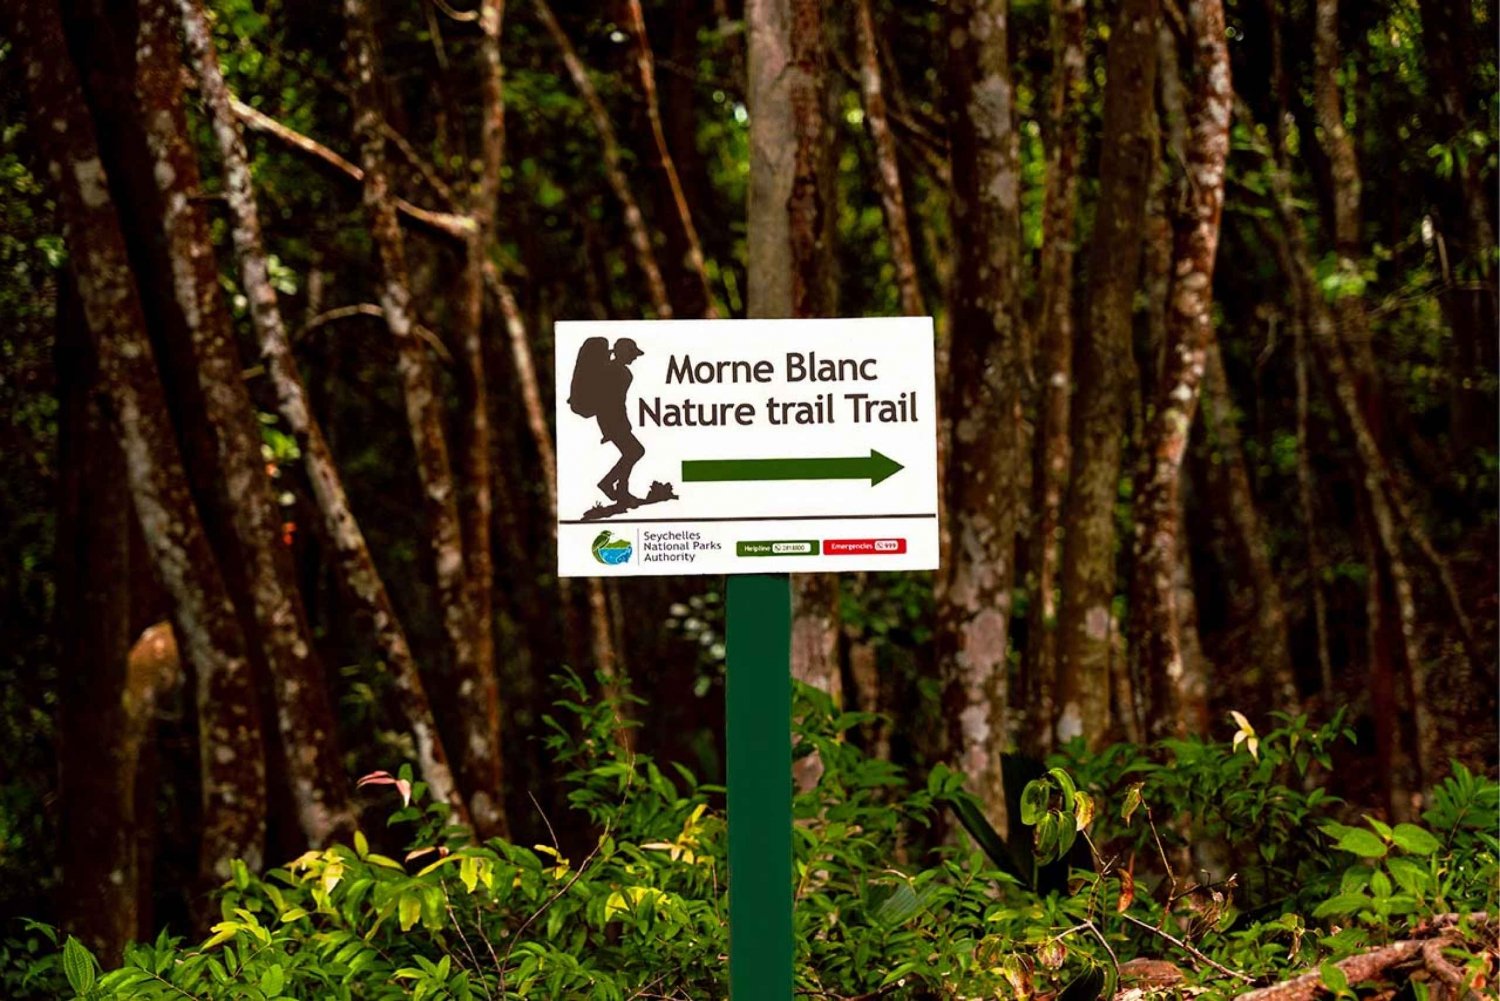 From Mahe: Guided Nature Trail Walk to Morne Blanc